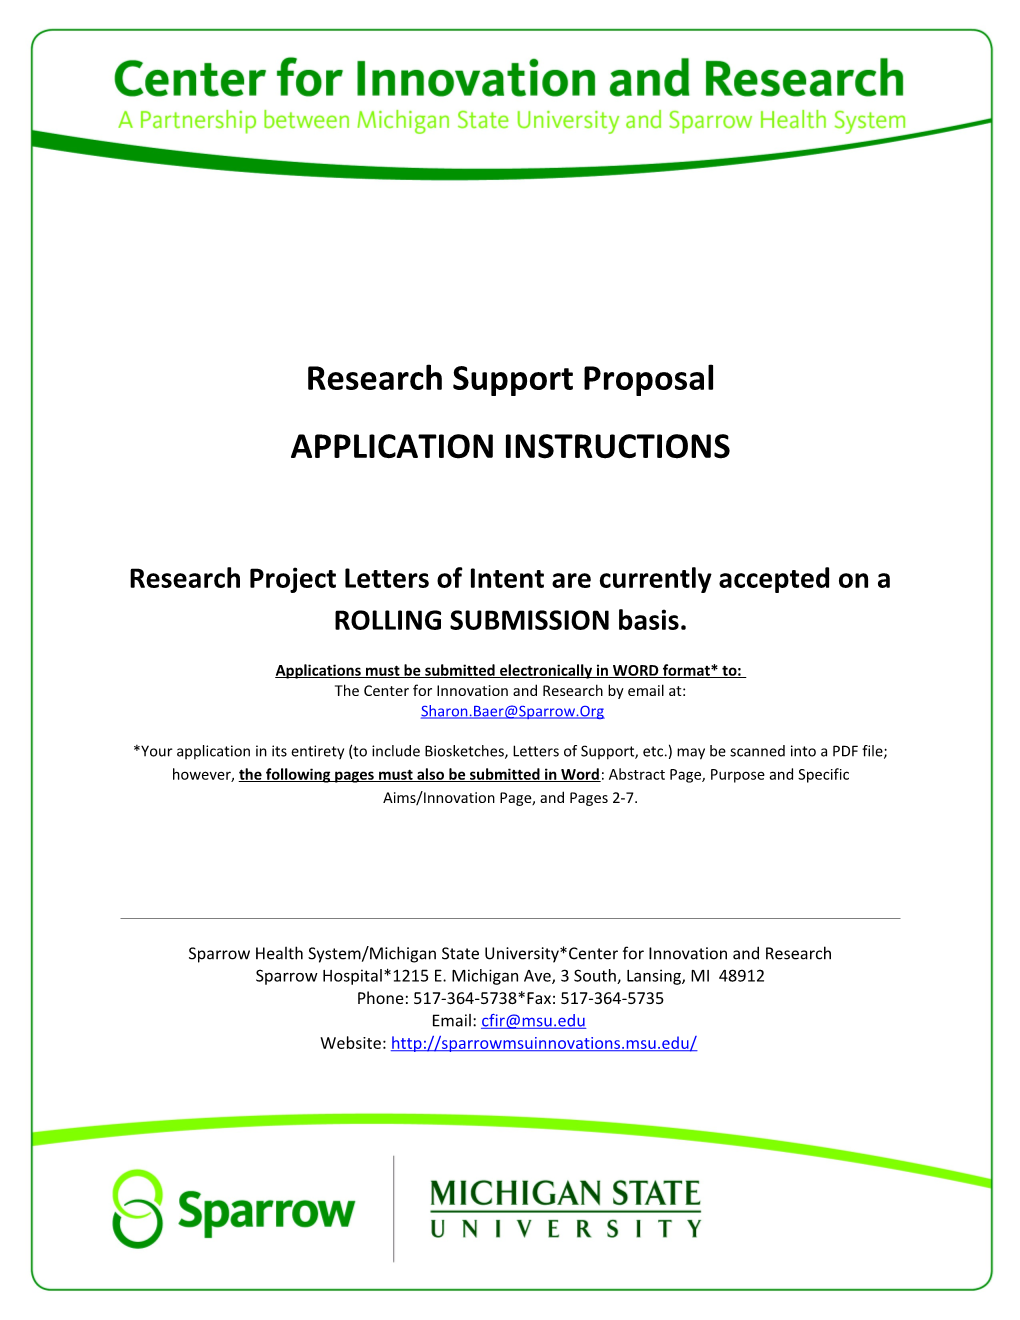 Research Project Letters of Intent Are Currently Accepted on a ROLLING SUBMISSION Basis